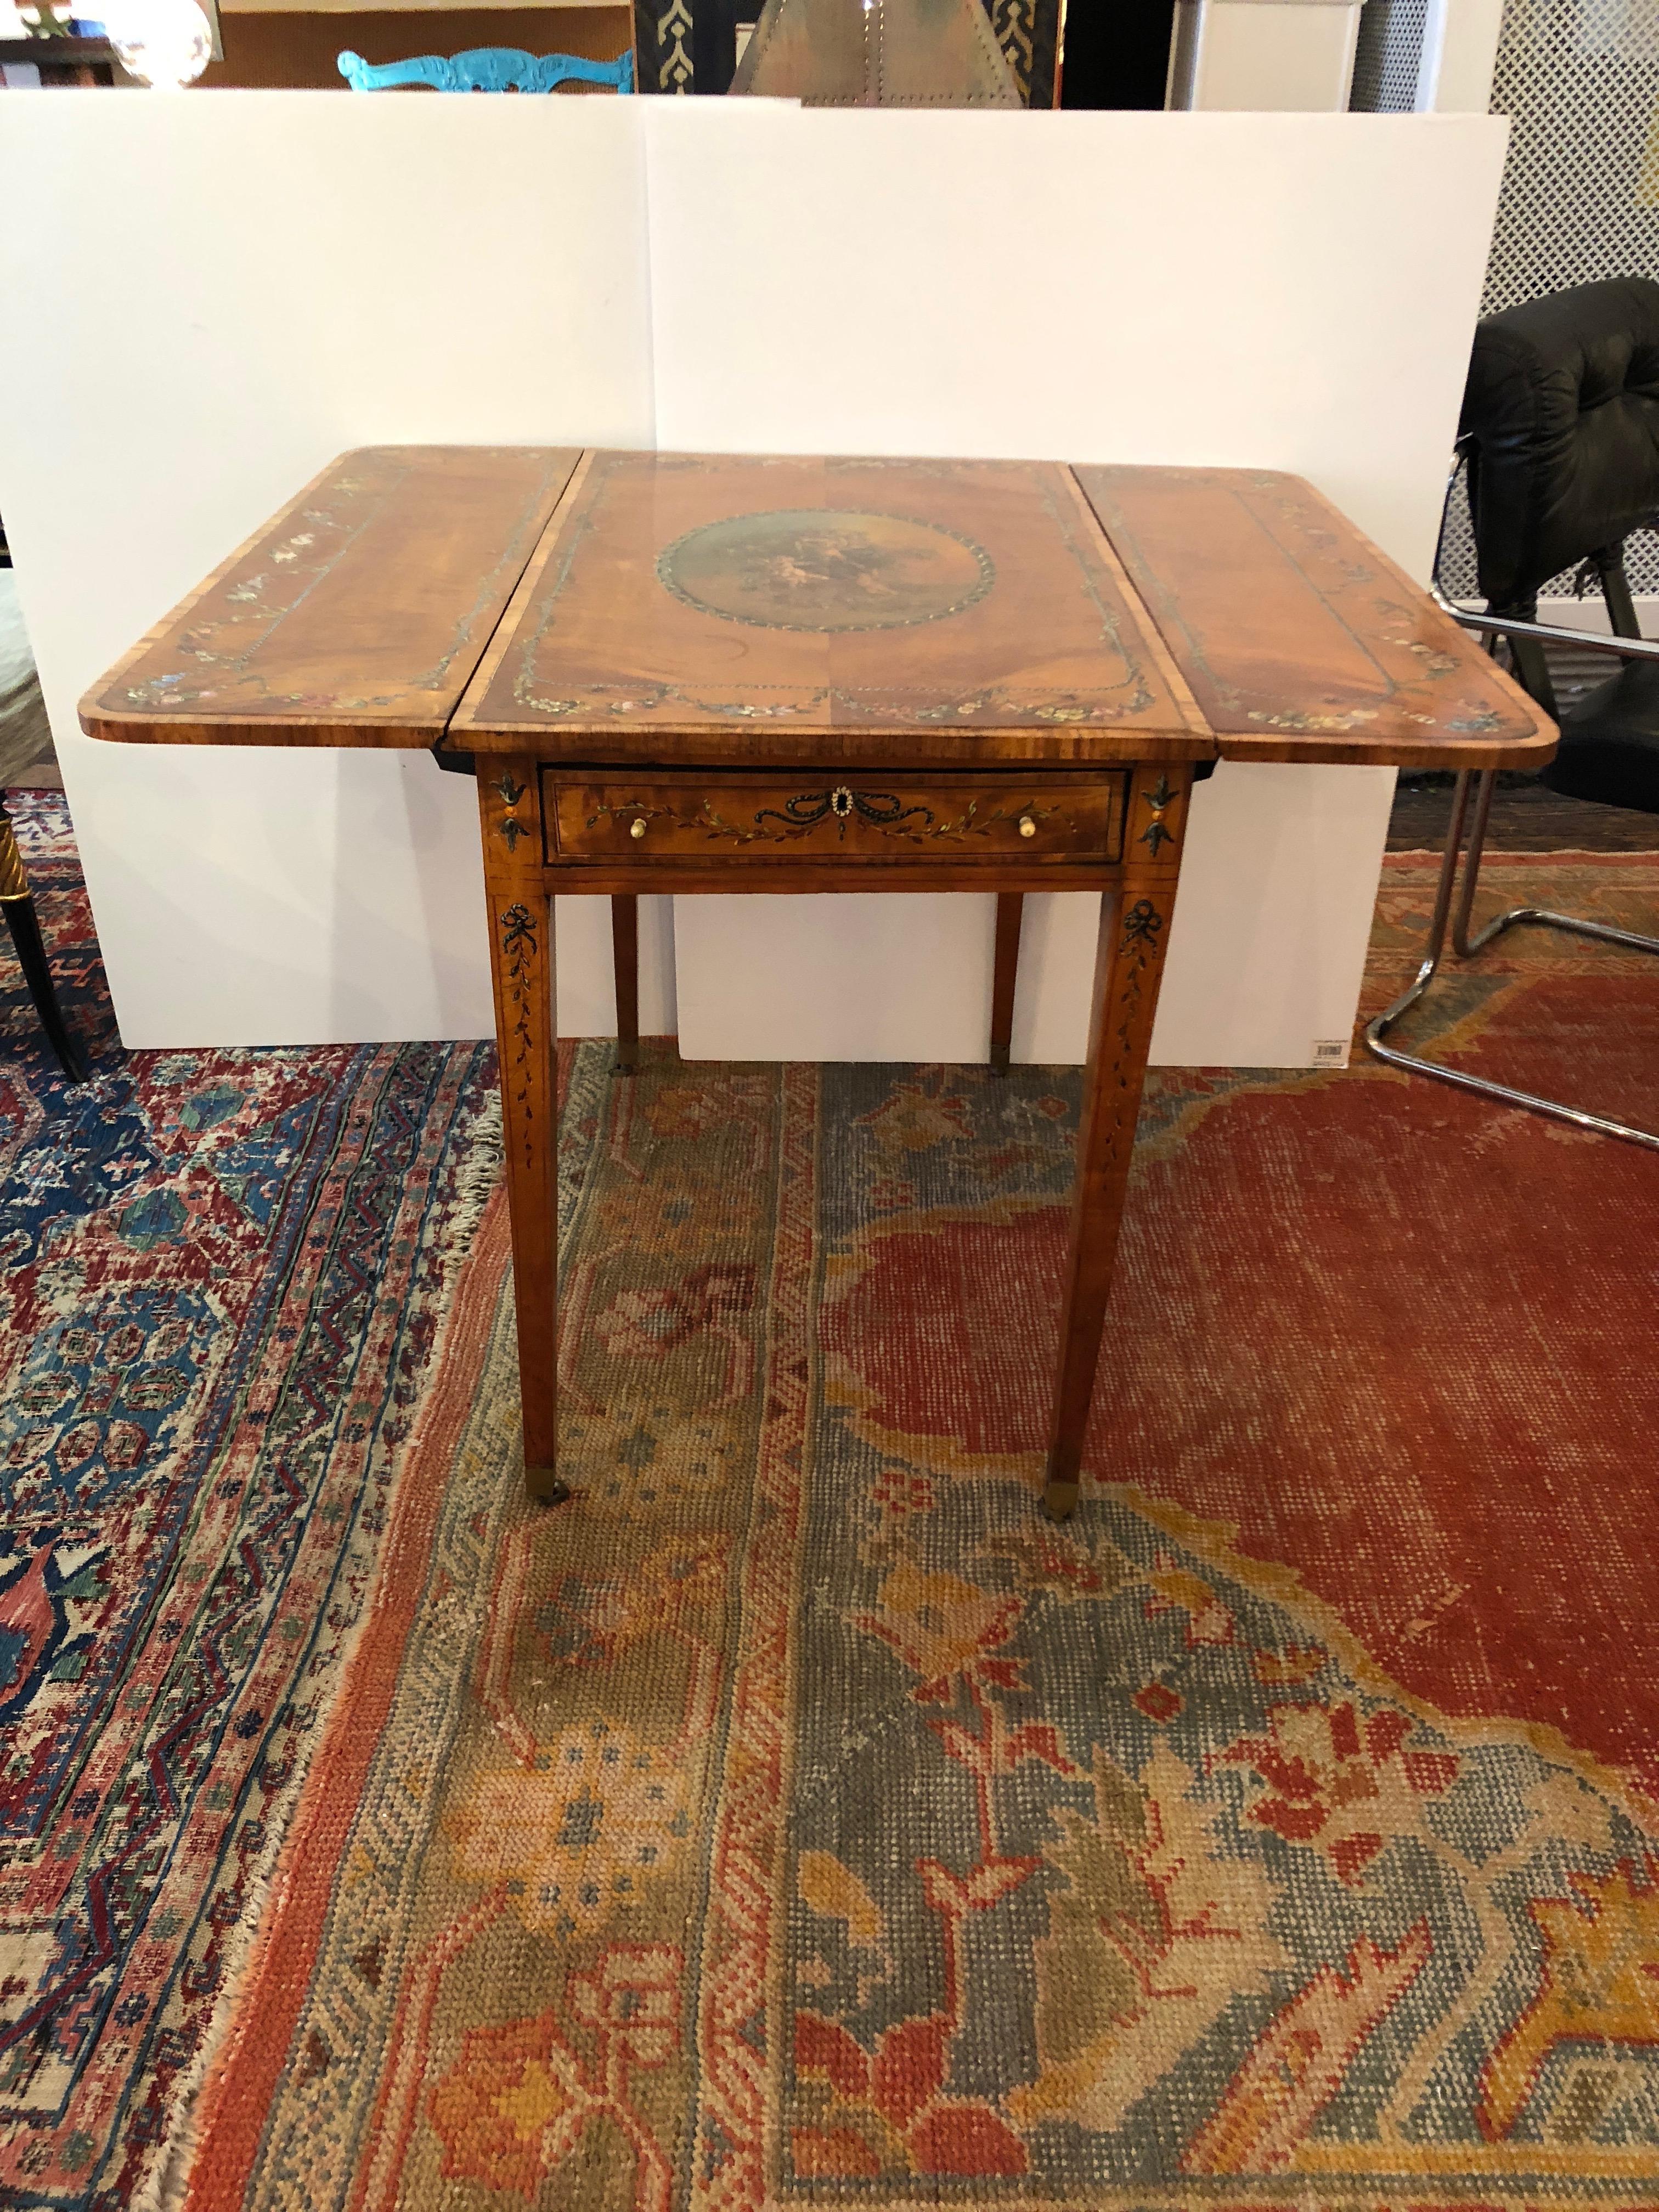 A very beautiful antique French drop-leaf satinwood side table adorned with a central oval landscape having cherubs, while flowers and garlands embellish elsewhere. There is a single drawer with original bone knobs and escucheon, and the tapered